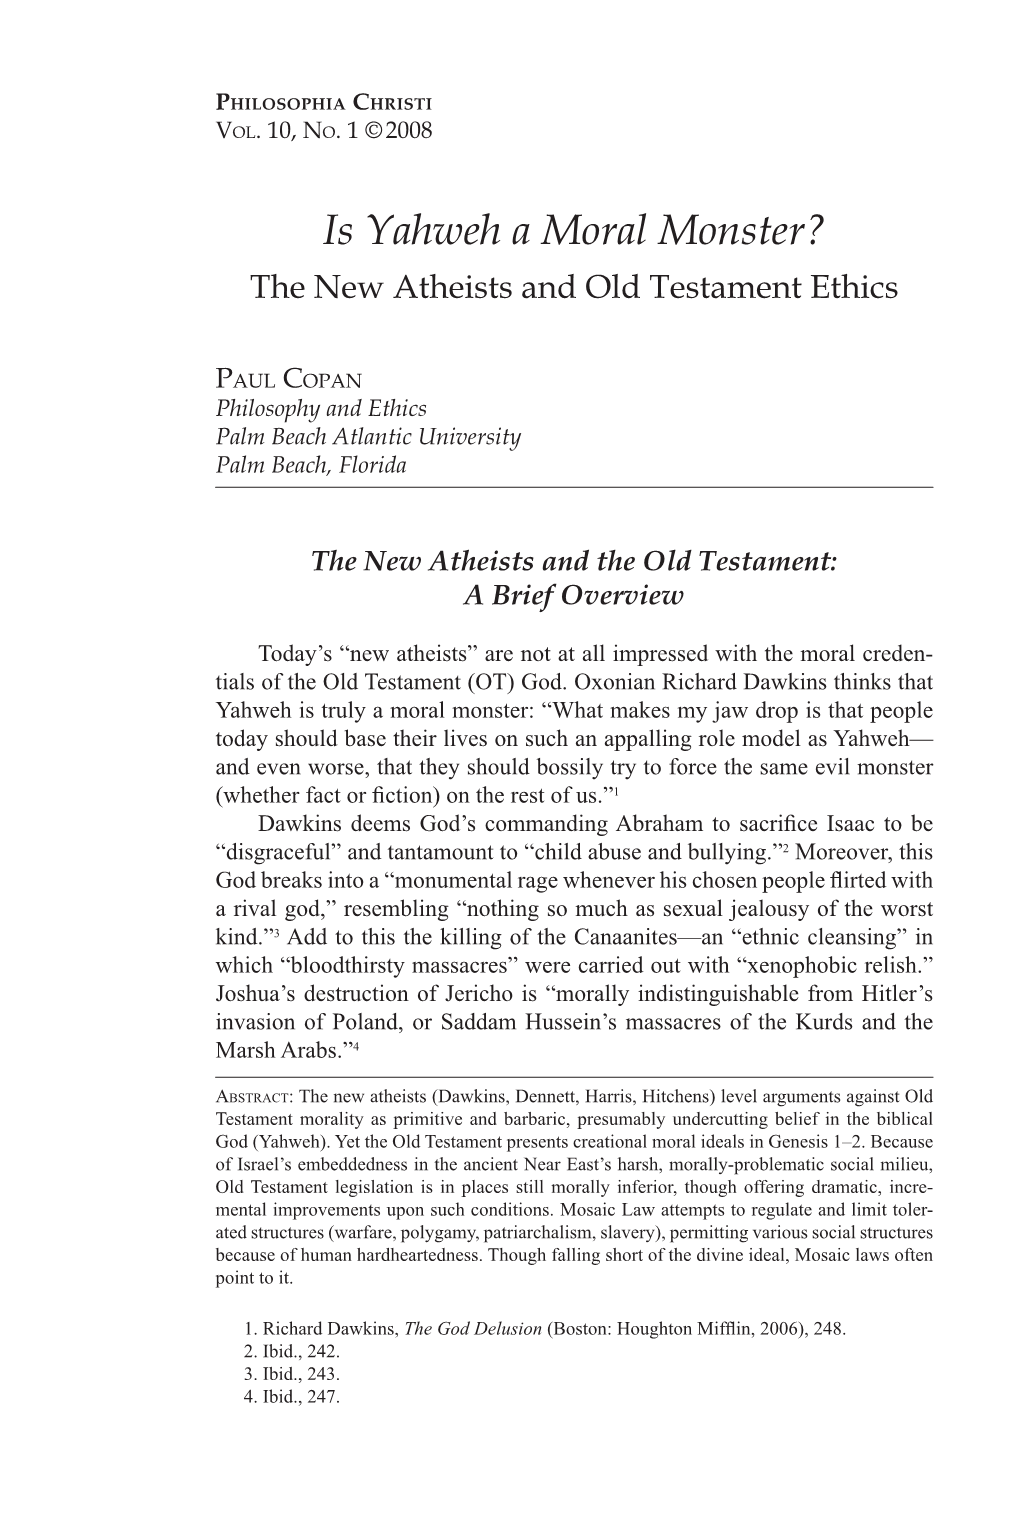 Is Yahweh a Moral Monster? the New Atheists and Old Testament Ethics